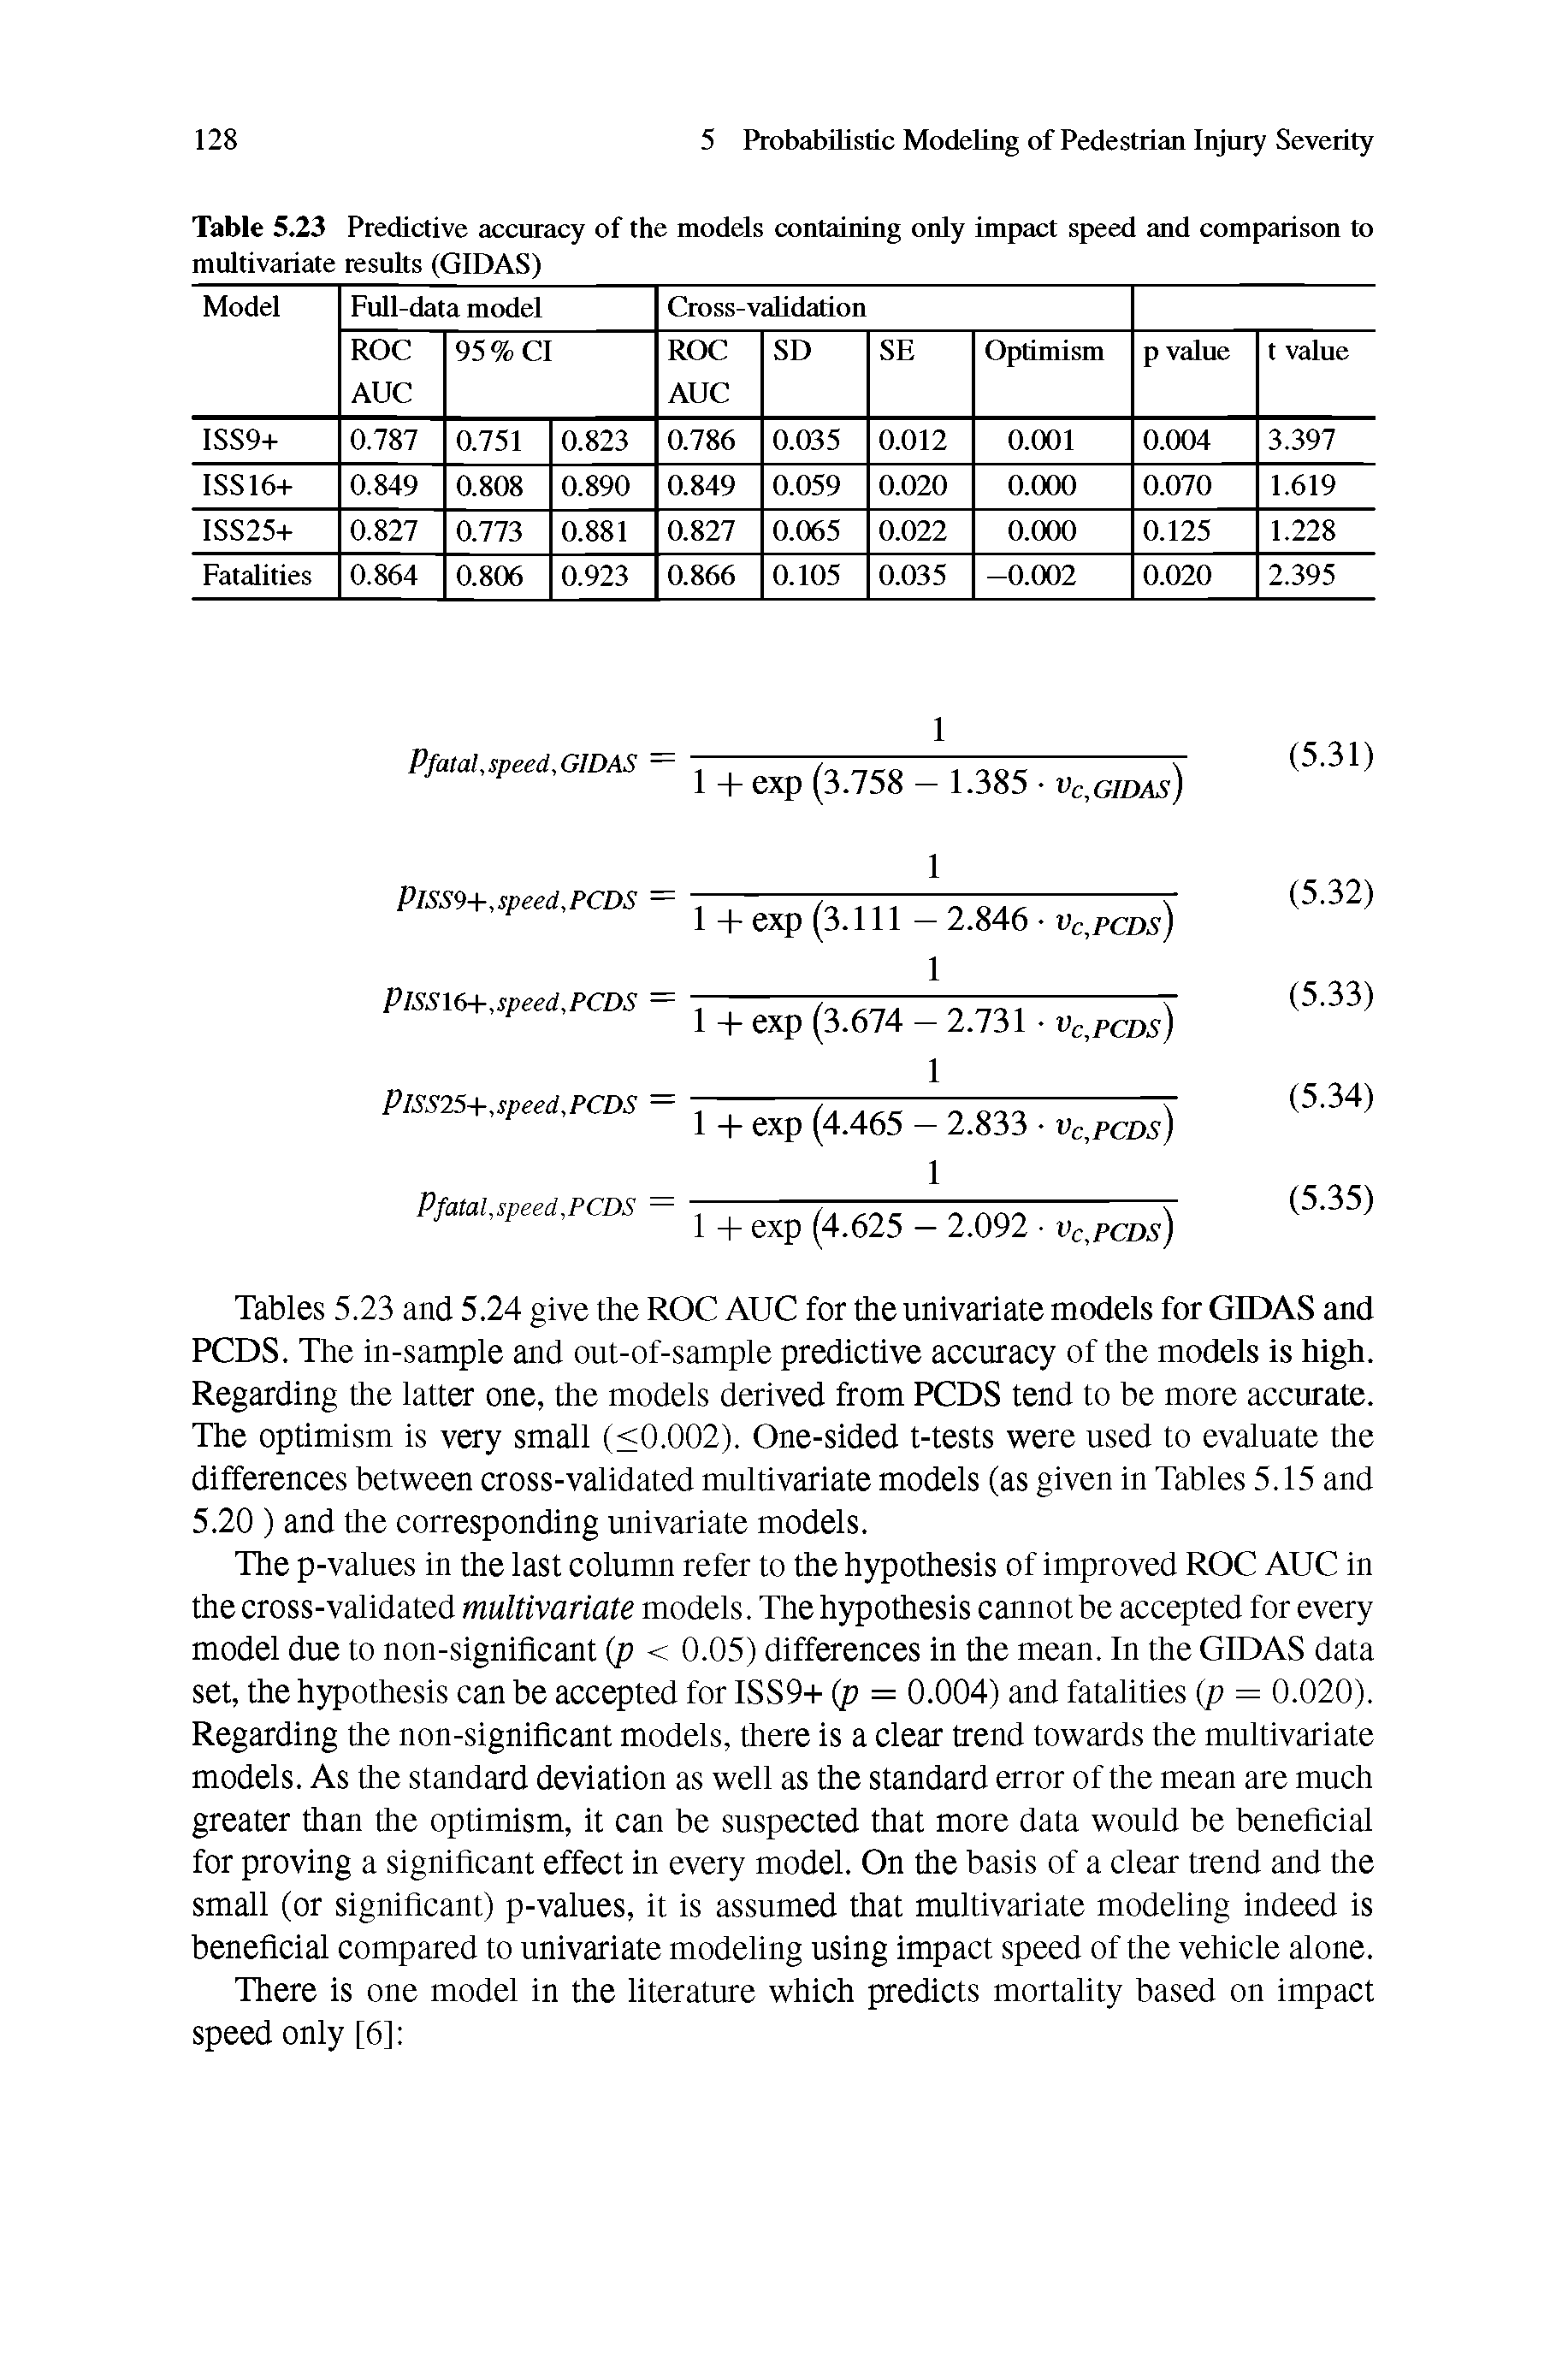 Tables 5.23 and 5.24 give the ROC AUC for the univariate models for GIDAS and PCDS. The in-sample and out-of-sample predictive accuracy of the models is high. Regarding the latter one, the models derived from PCDS tend to be more accurate. The optimism is very small (<0.002). One-sided t-tests were used to evaluate the differences between cross-validated multivariate models (as given in Tables 5.15 and 5.20 ) and the corresponding univariate models.